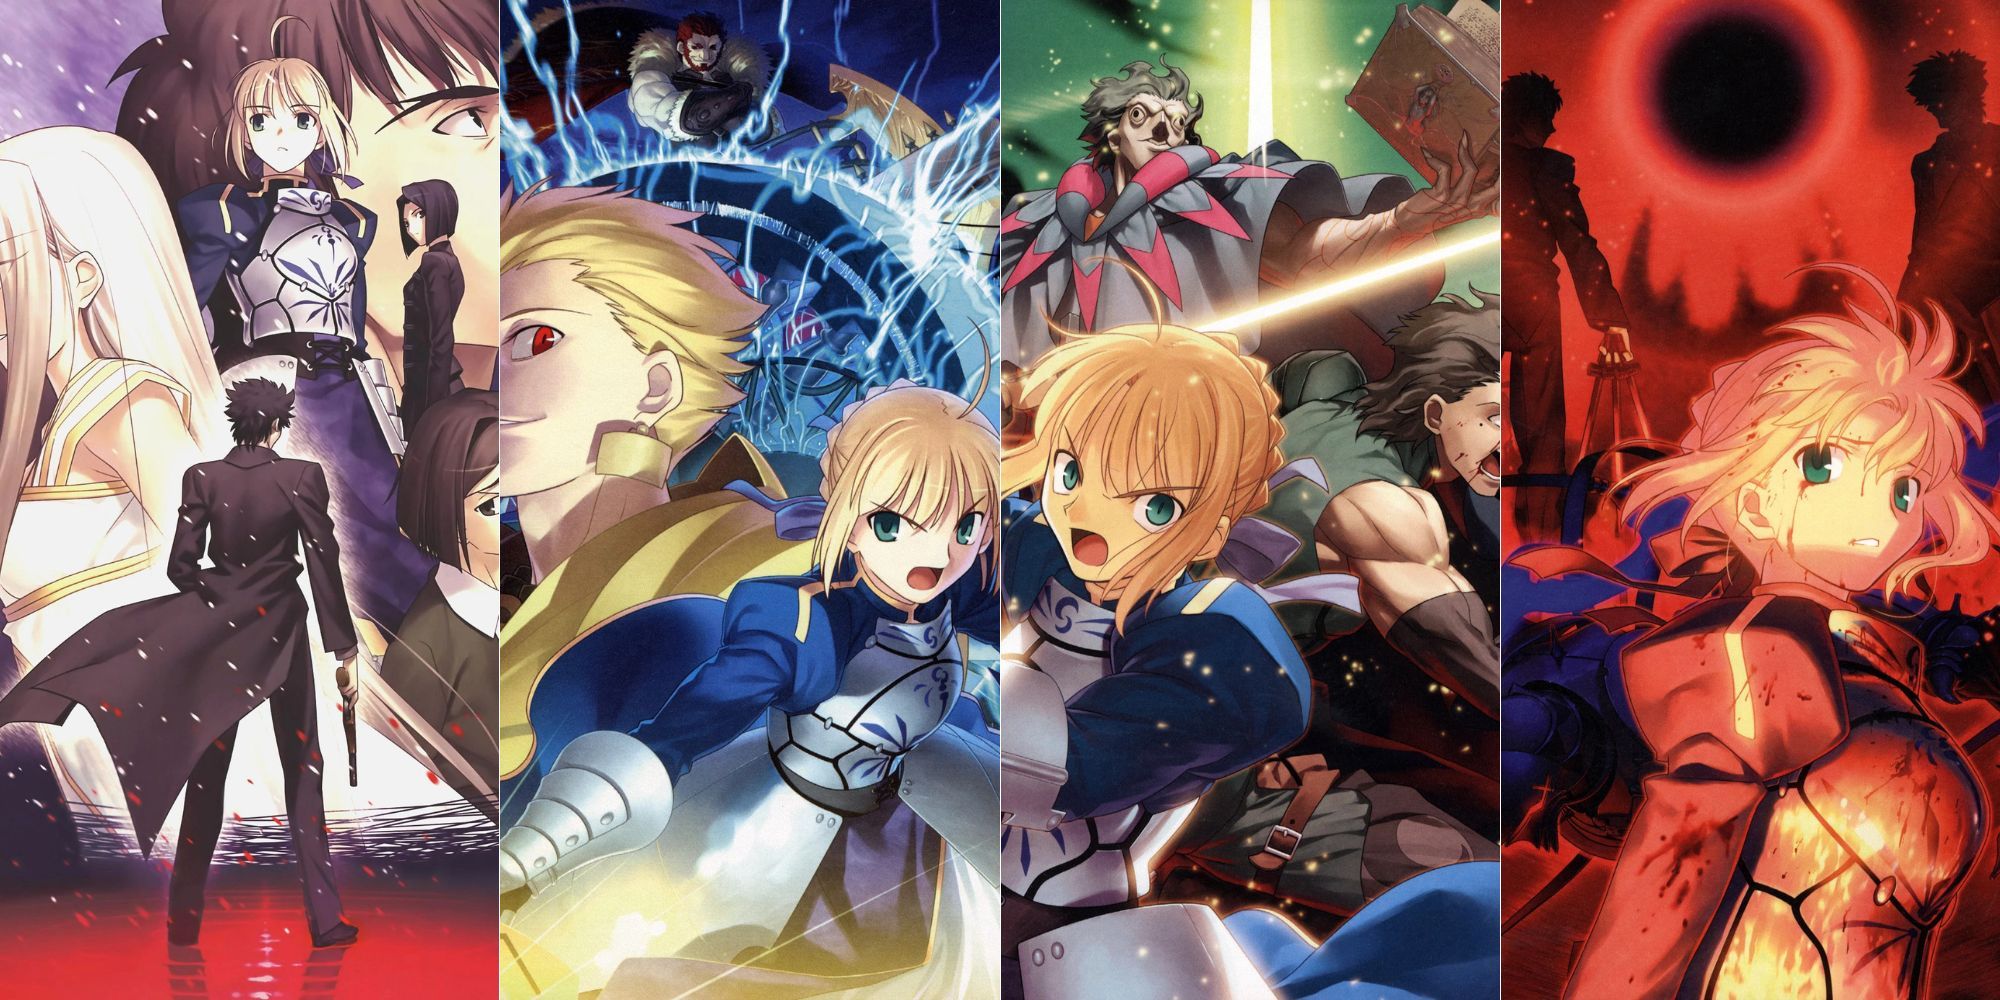 Image of the light novel Fate/Zero of the 4 volumes